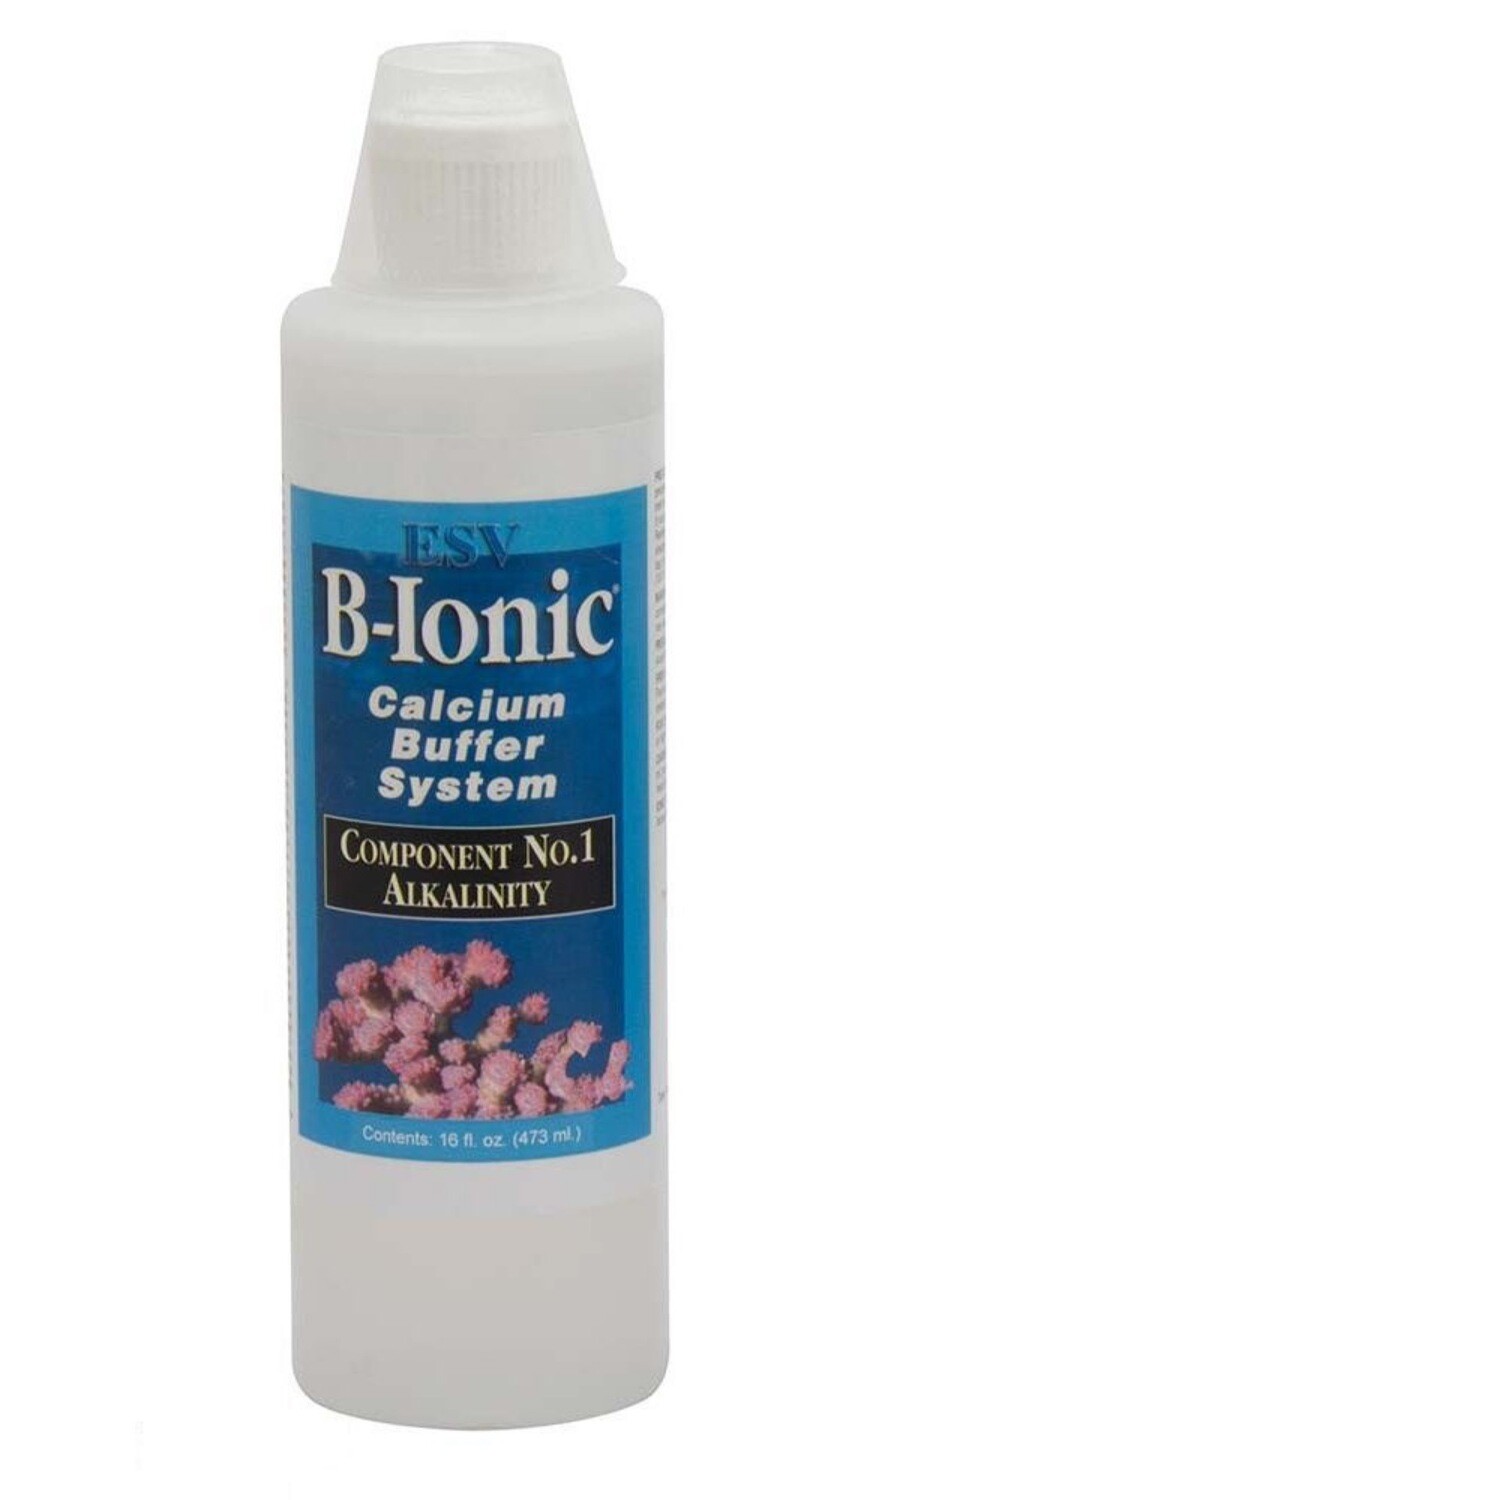 B-Ionic Calcium Buffer System Component No. 1 Alkalinity 